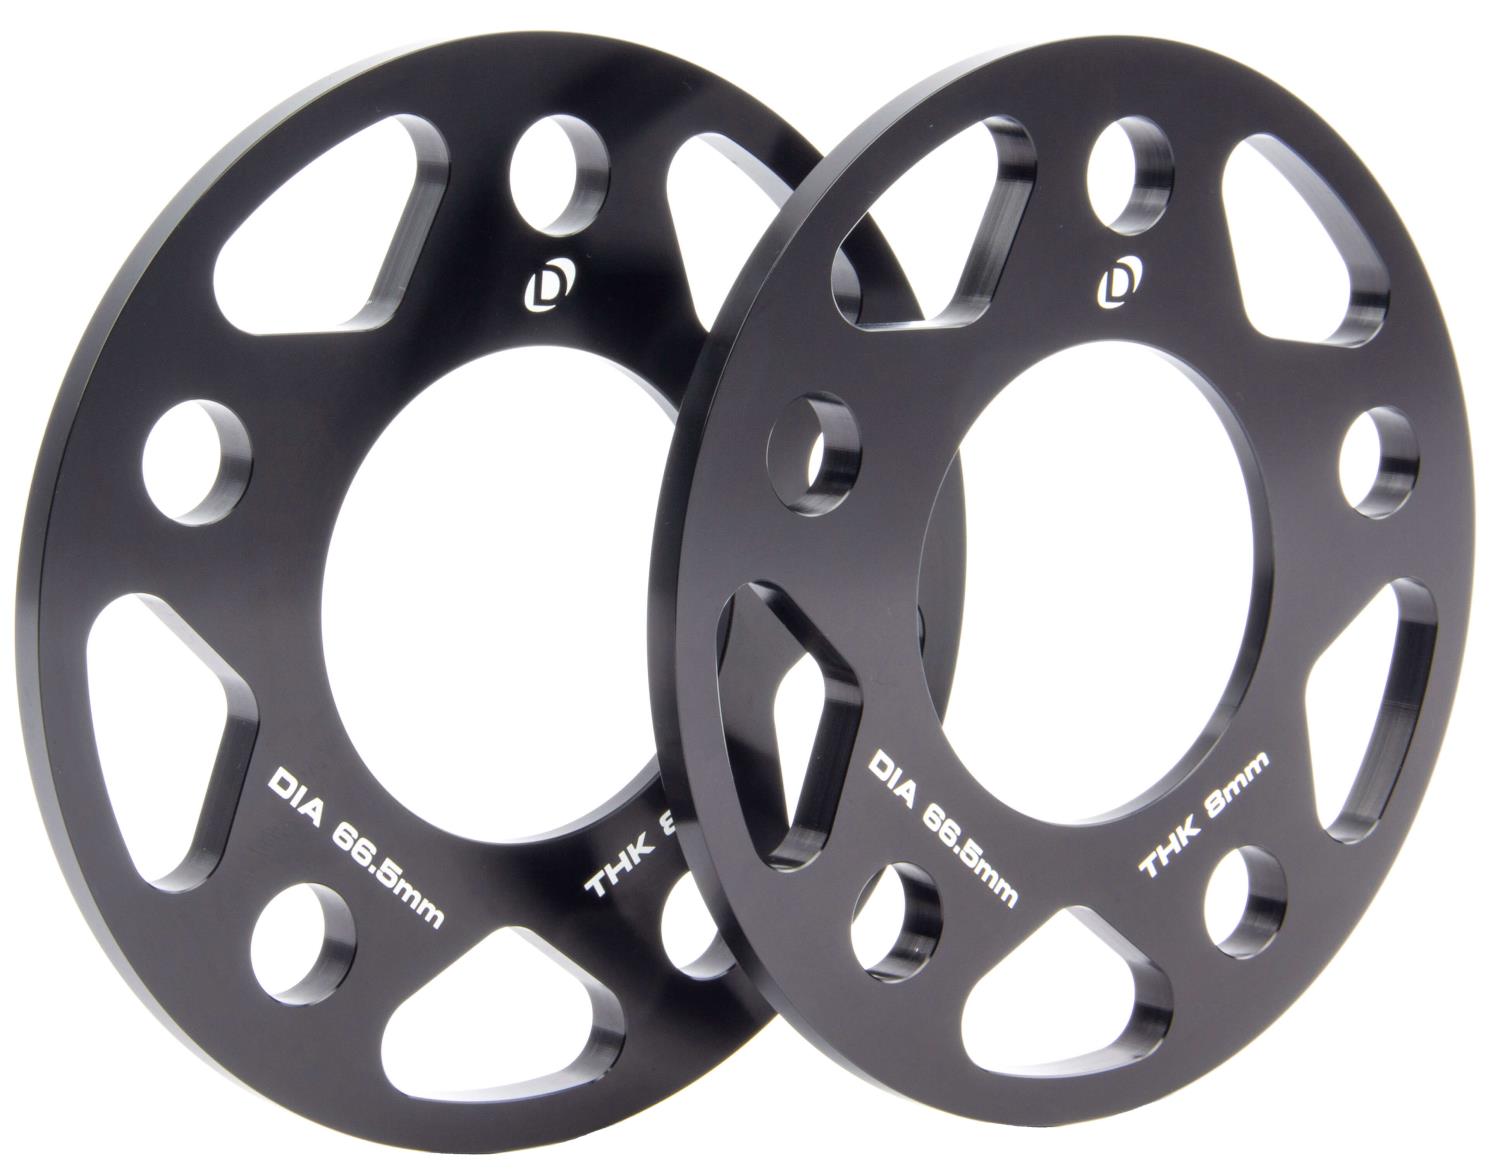 Machined Aluminum Wheel Spacers [8 mm Thick] for